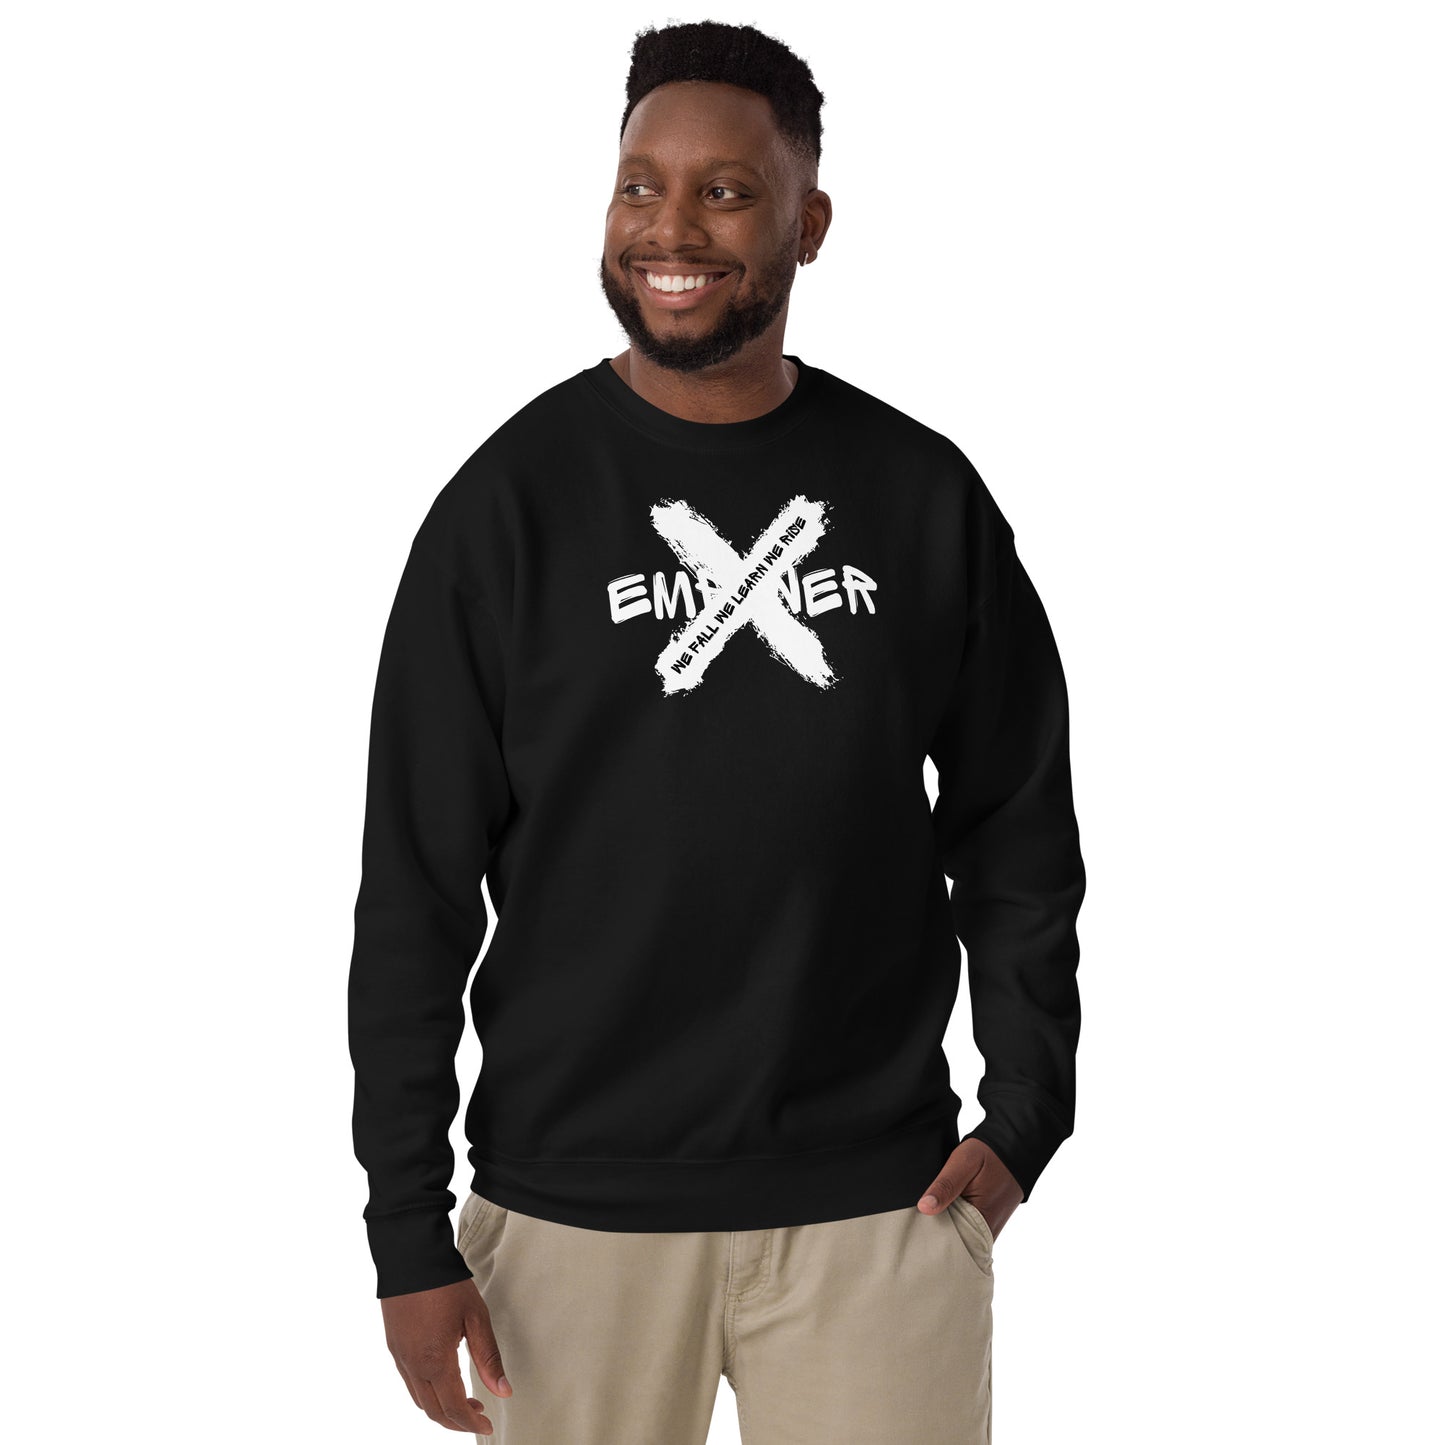 A man wearing a black Empower X Clothing Mental Health Quote Sweatshirt